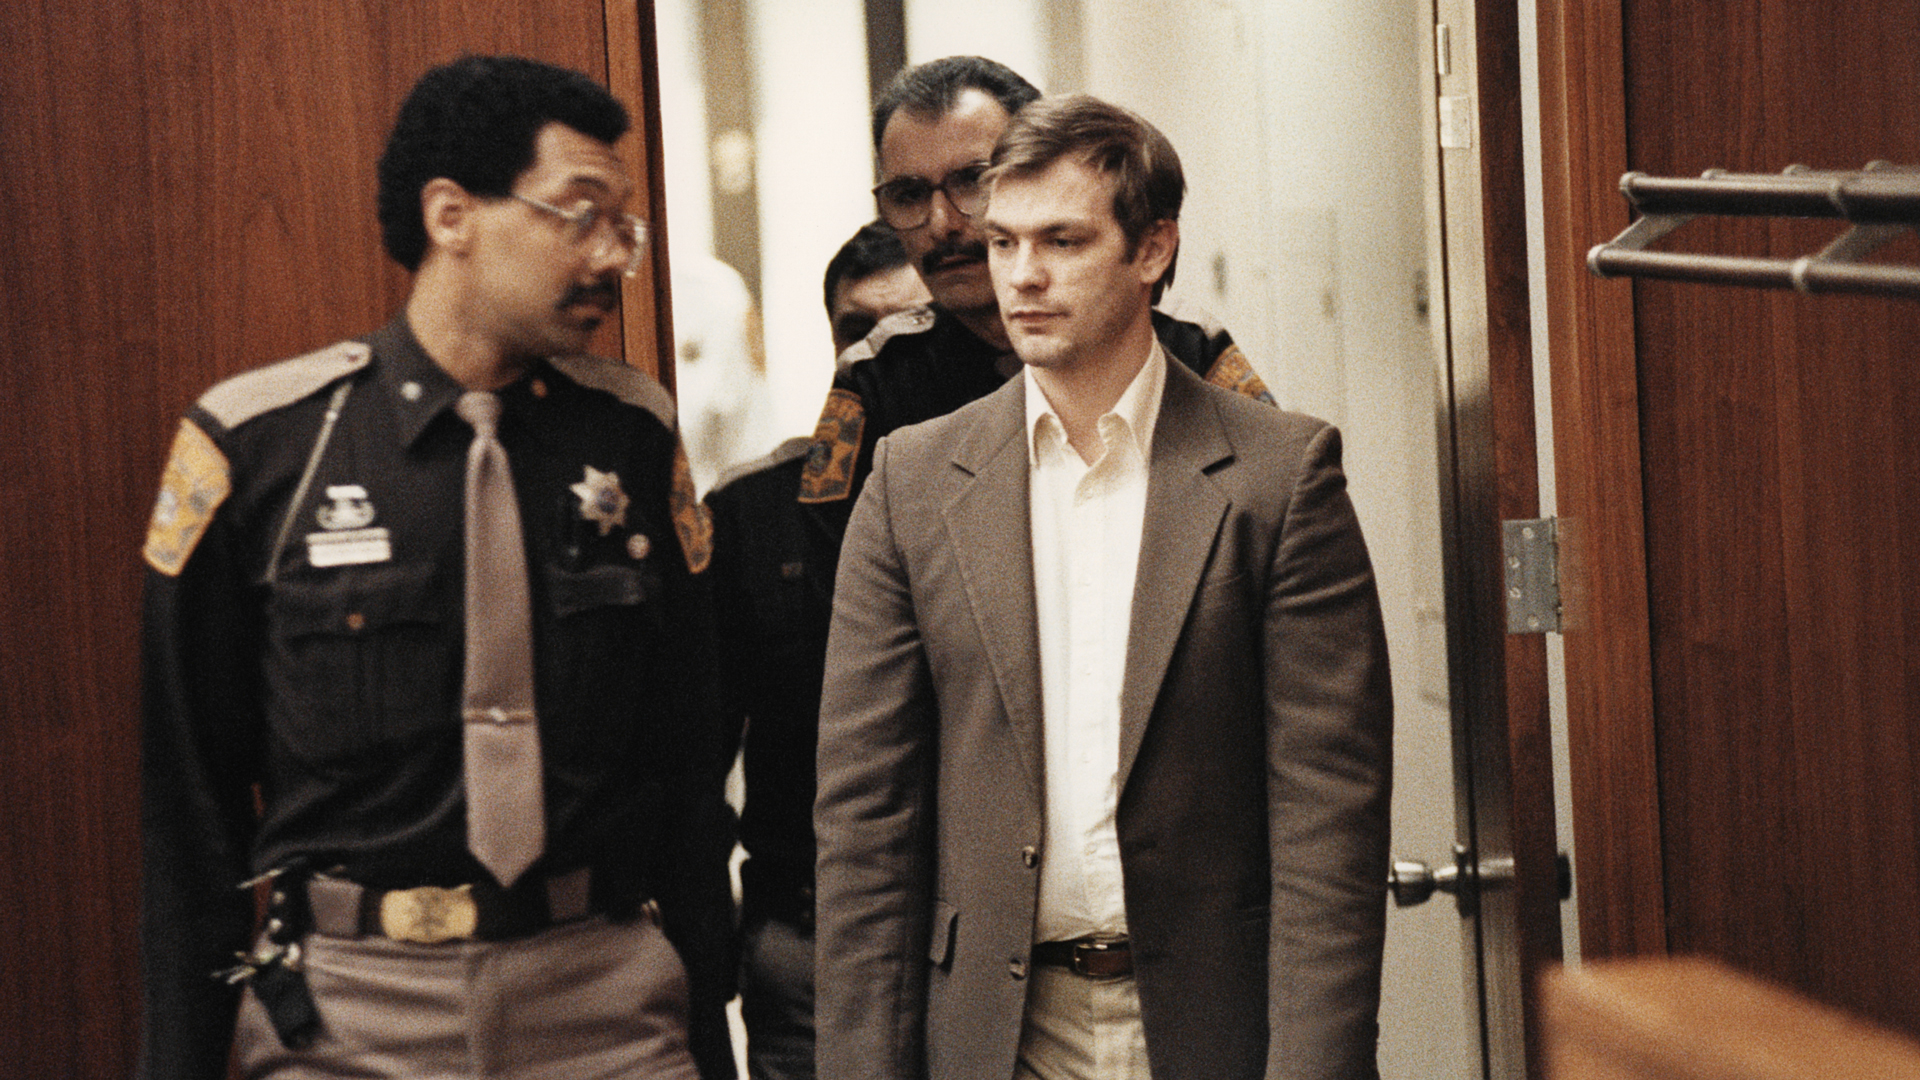 Jeffrey Dahmer's Life and Suspicious Death from the Local Reporter Who First Covered His Gruesome Crimes